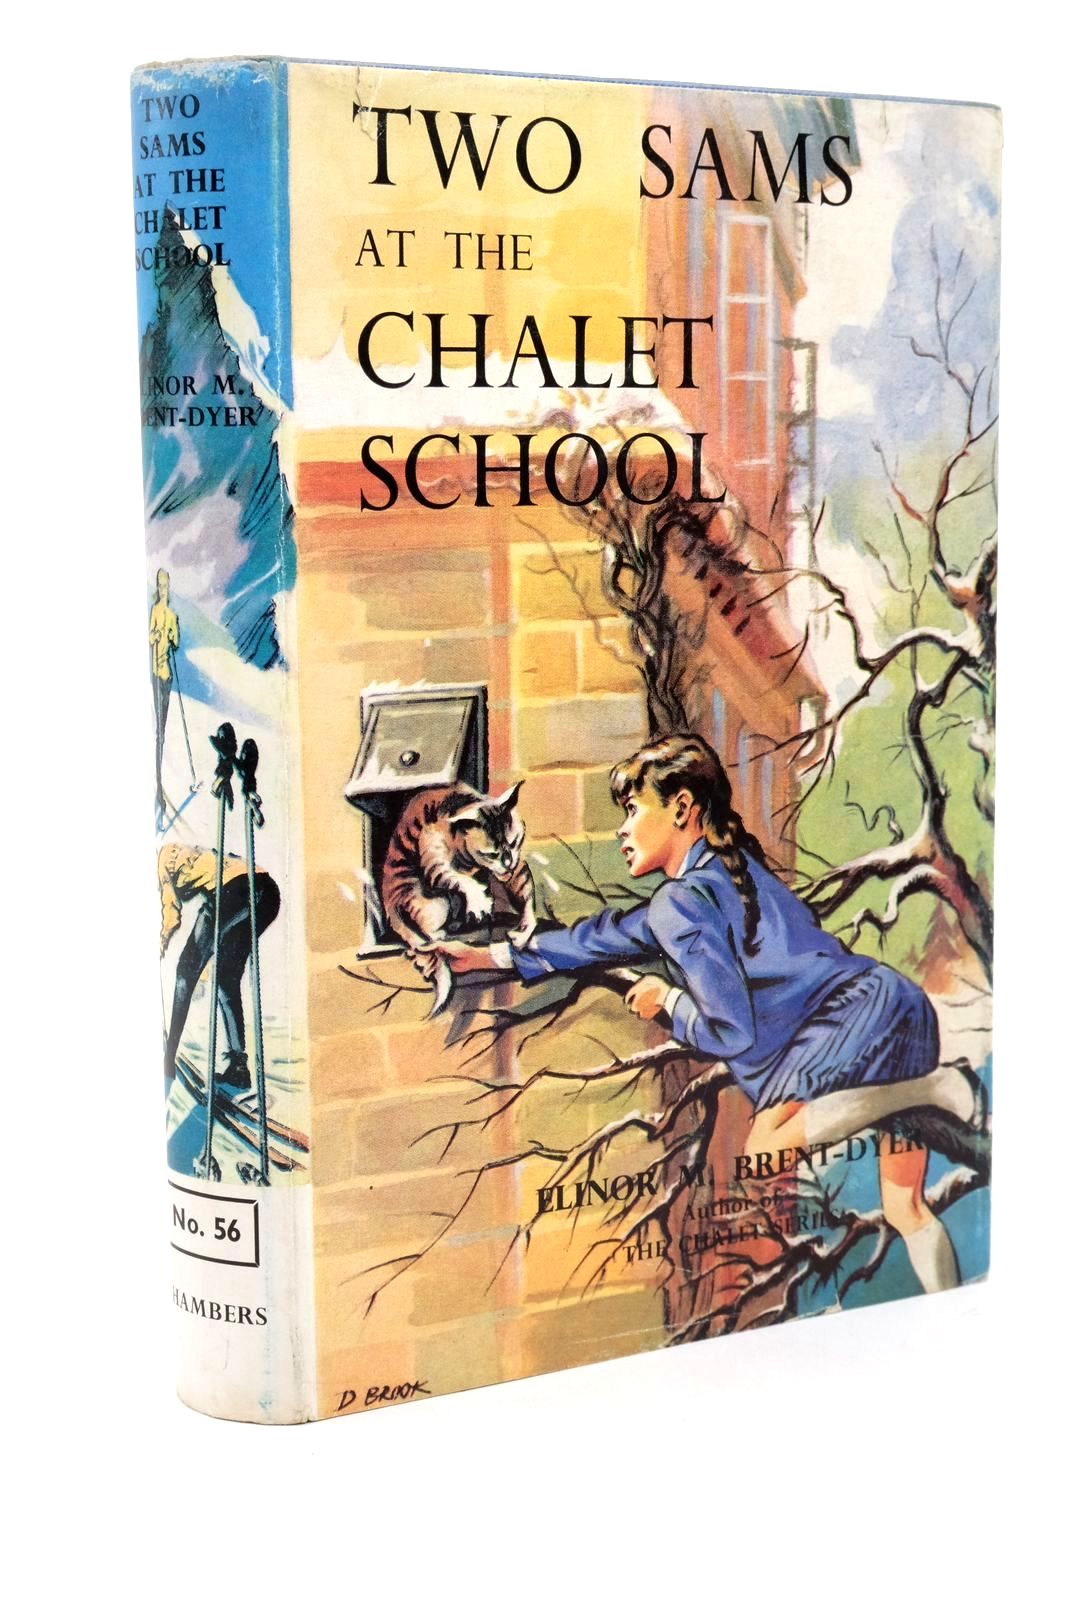 Photo of TWO SAMS AT THE CHALET SCHOOL written by Brent-Dyer, Elinor M. published by W. &amp; R. Chambers Limited (STOCK CODE: 1322733)  for sale by Stella & Rose's Books